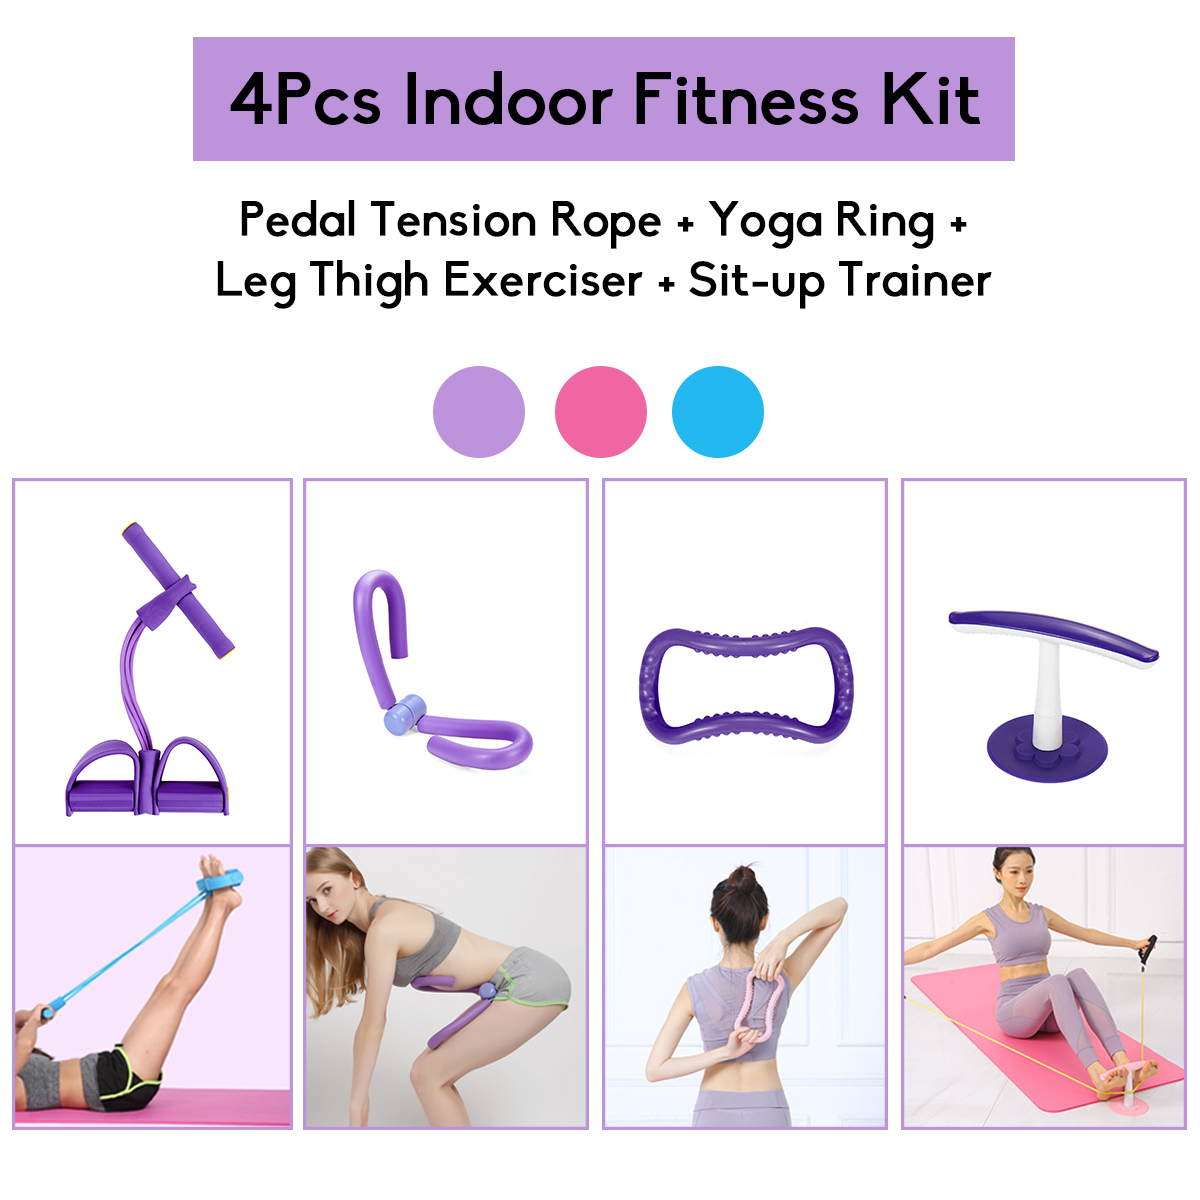 4Pcs Pedal Tension Rope Yoga Ring Leg Thigh Exercise Tools Indoor Fitness Kit